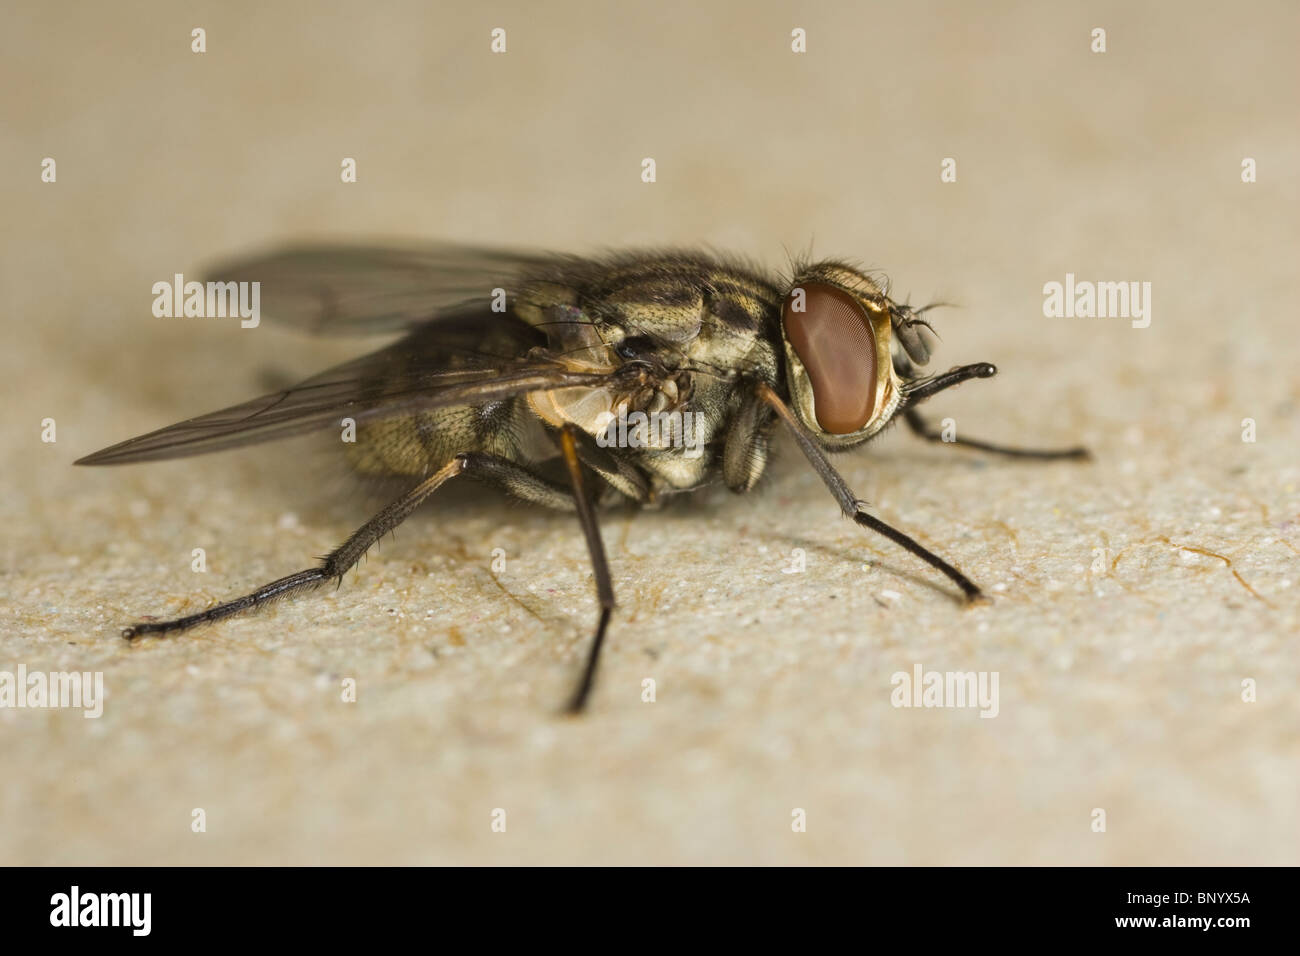 Stable Fly (Stomoxys calcitrans) ventral view Stock Photo